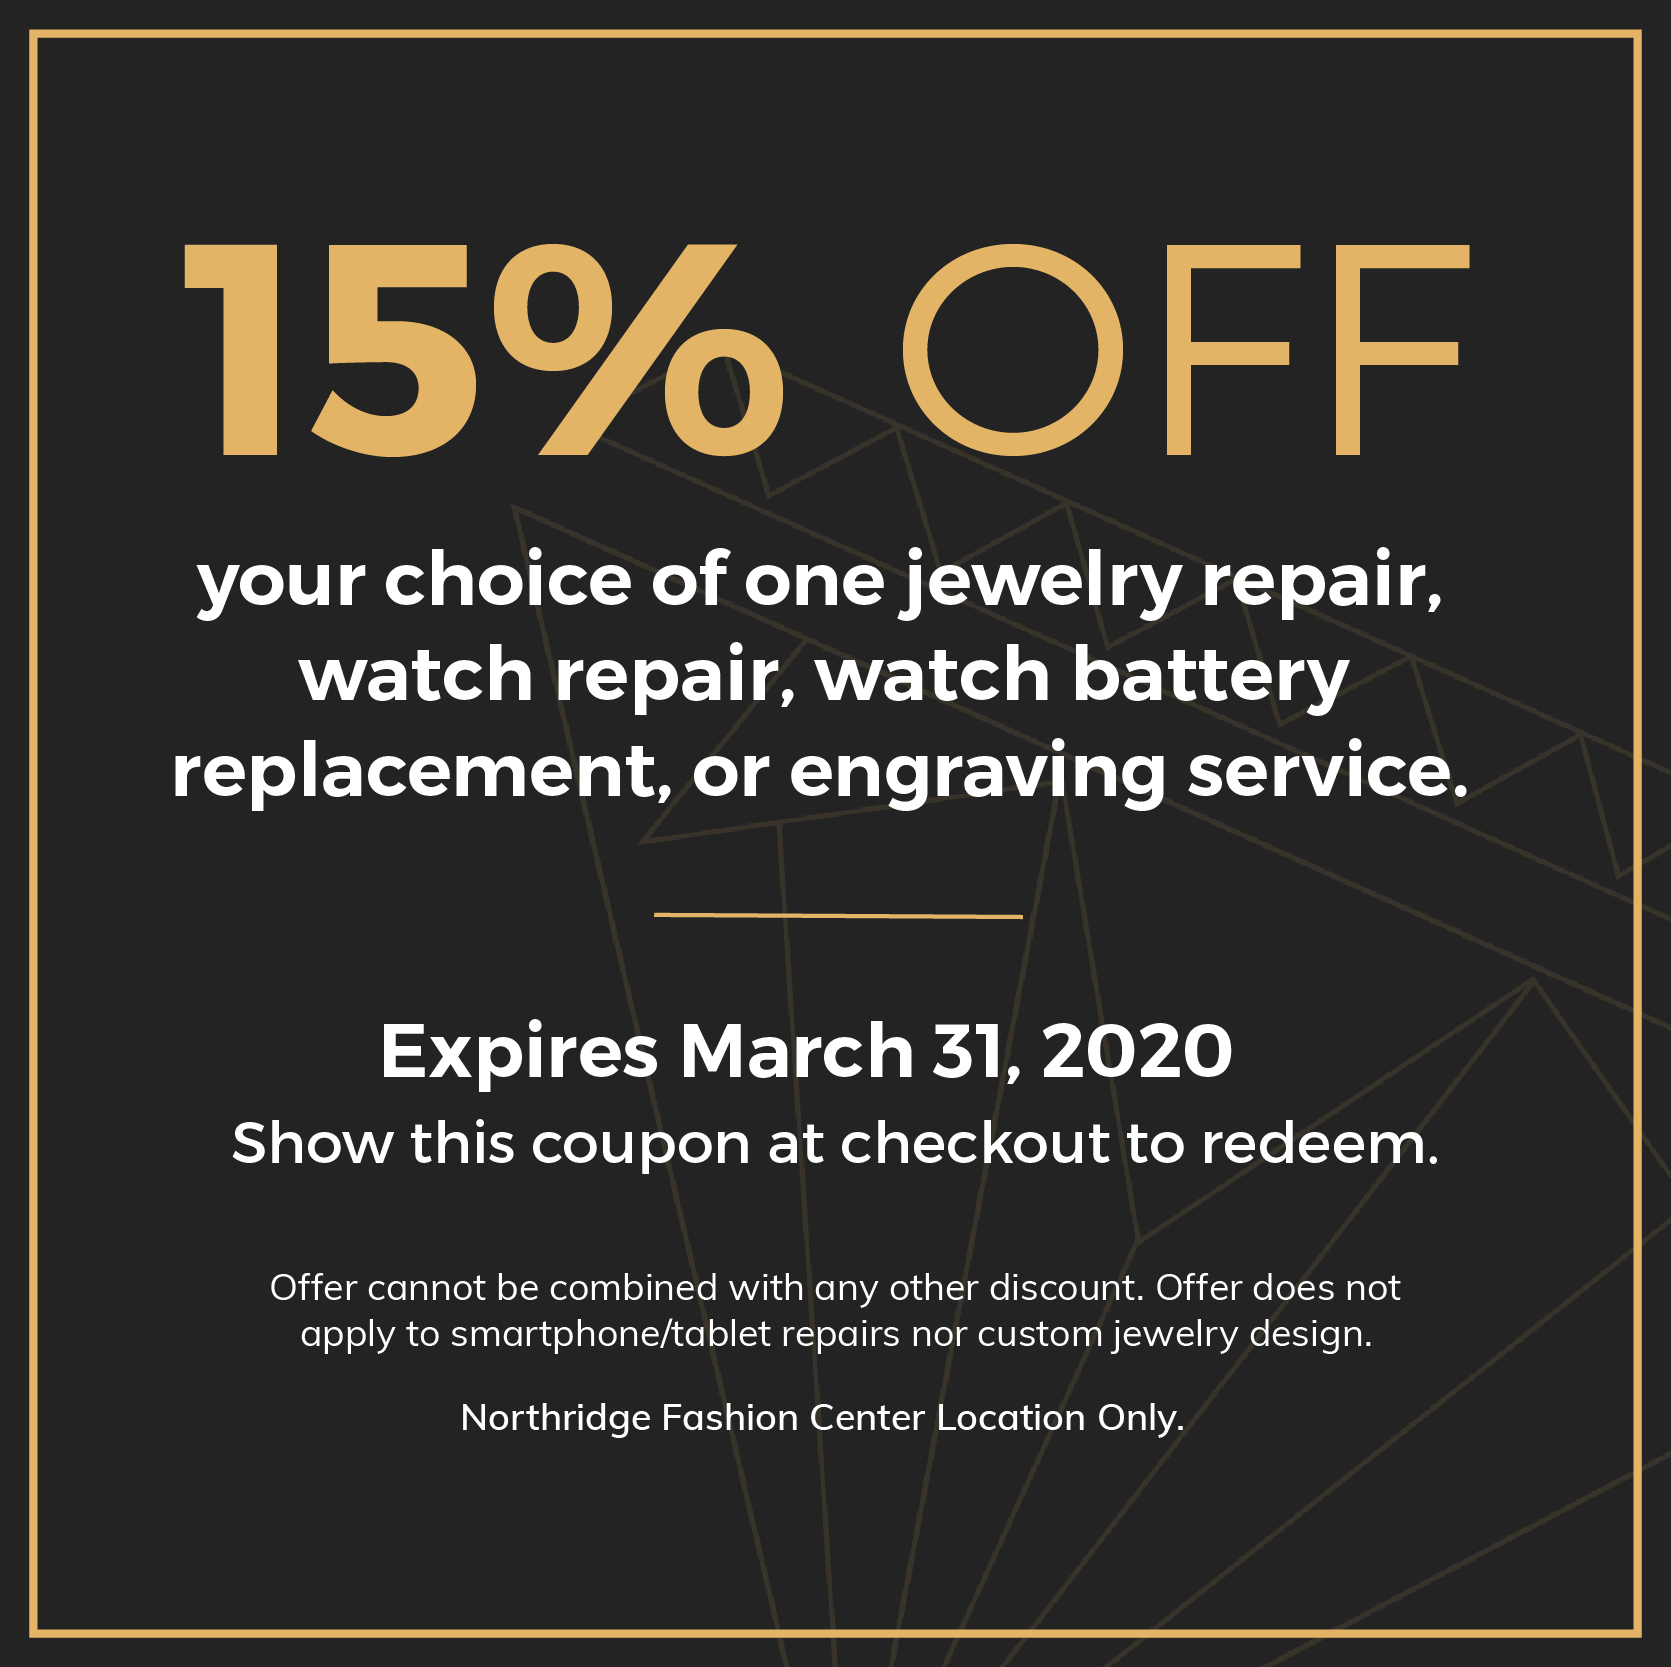 15% OFF. your choice of one jewelry repair, watch repair, watch battery replacement, or engraving service. Expires March 31, 2020. Show this coupon at checkout to redeem. Offer cannot be combined with any other discount. Offer does not apply to smartphone/tablet repairs nor custom jewelry design. Northridge Fashion Center Location Only.